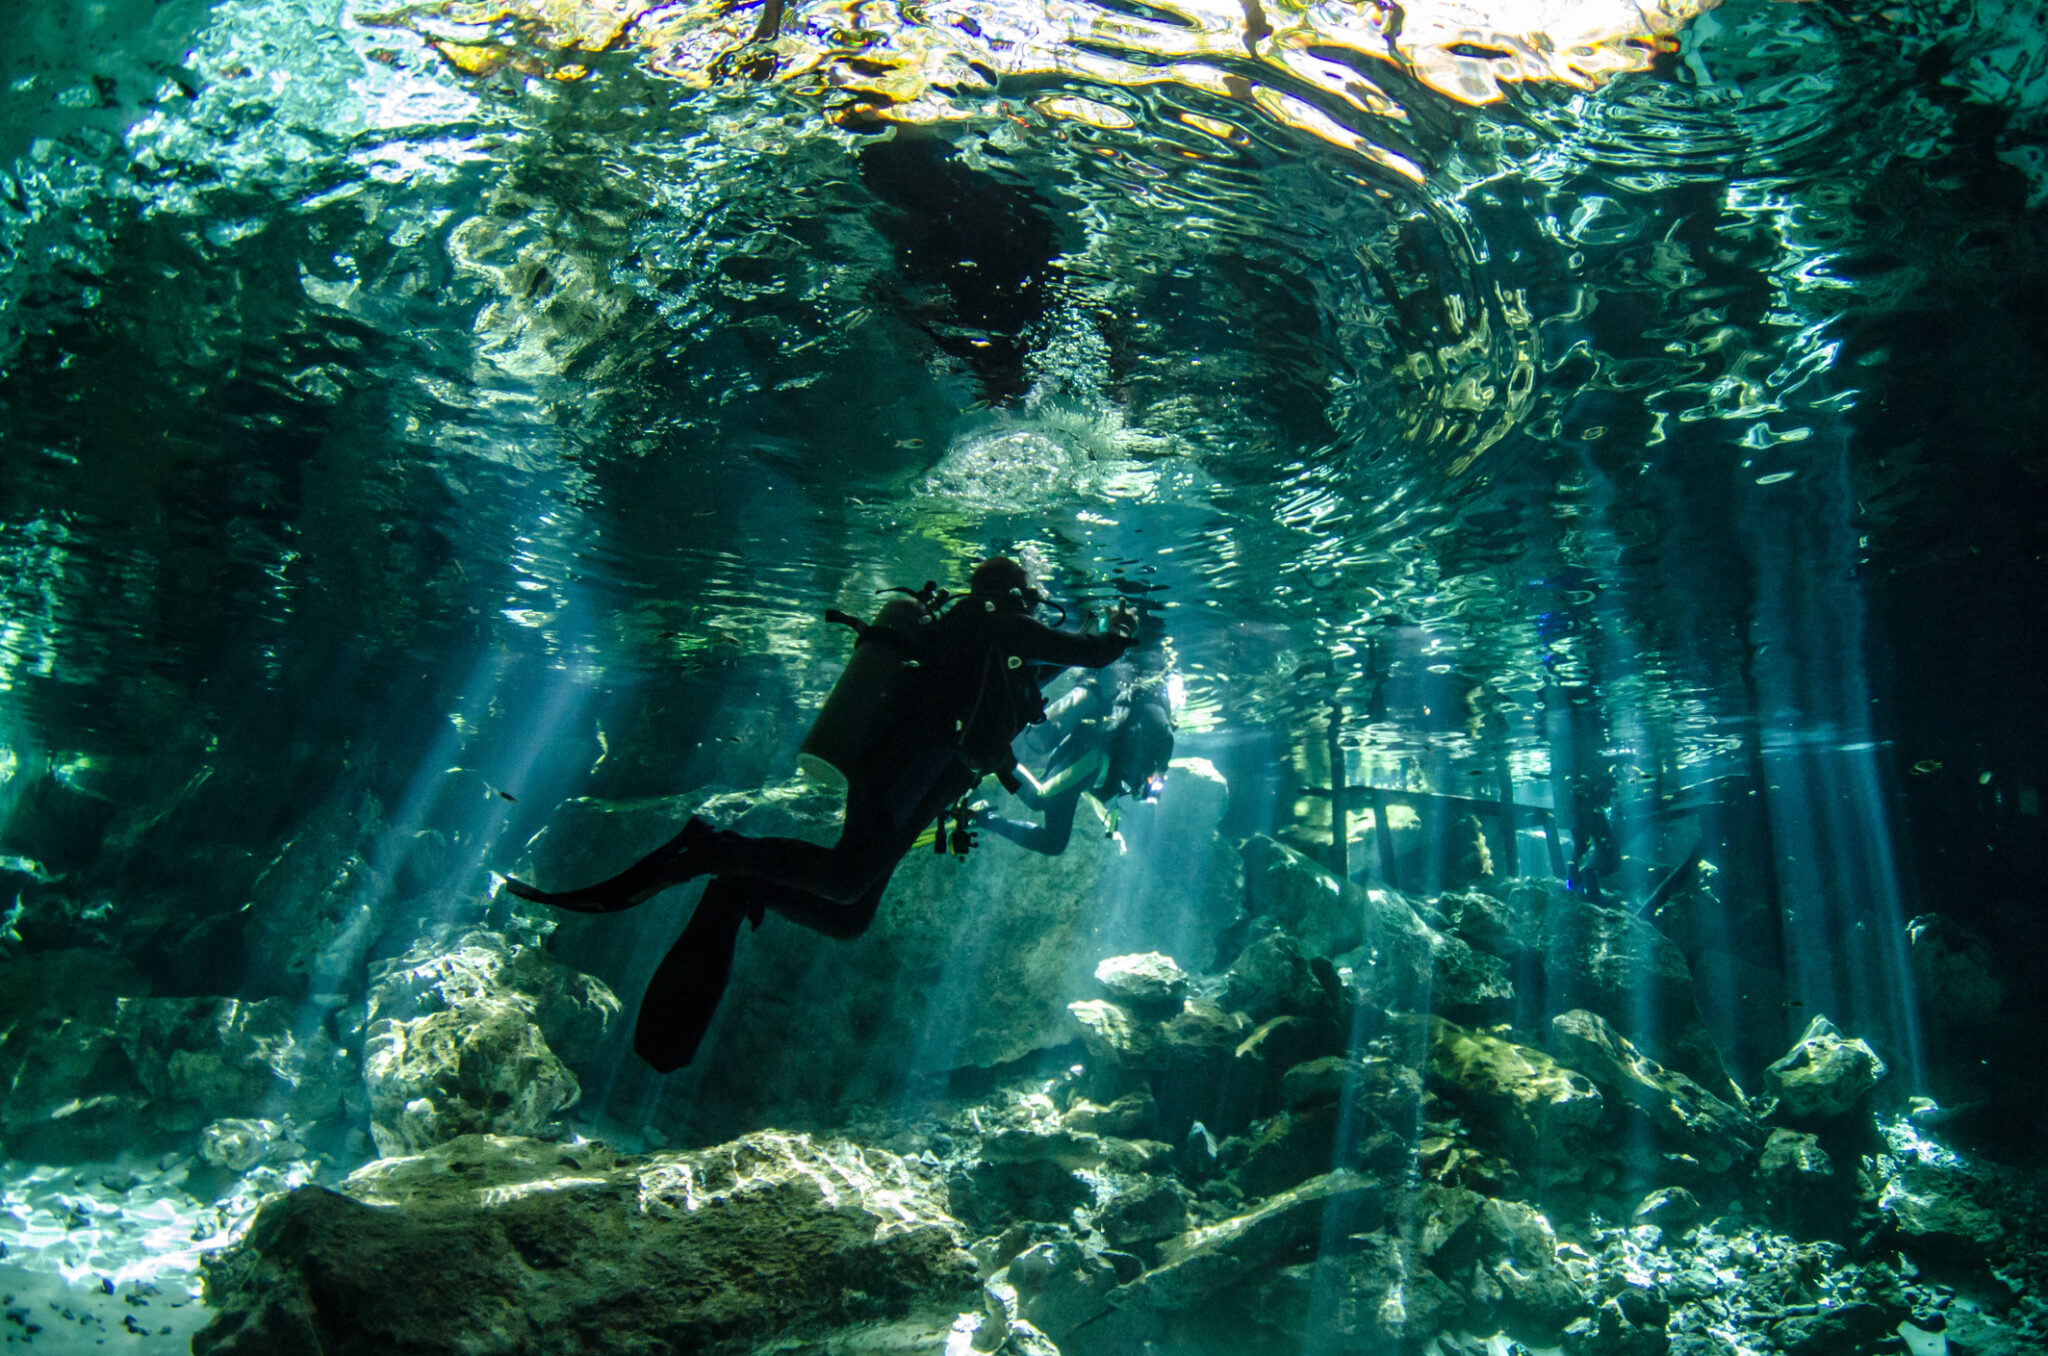 Diving in the Yucatan Cenotes